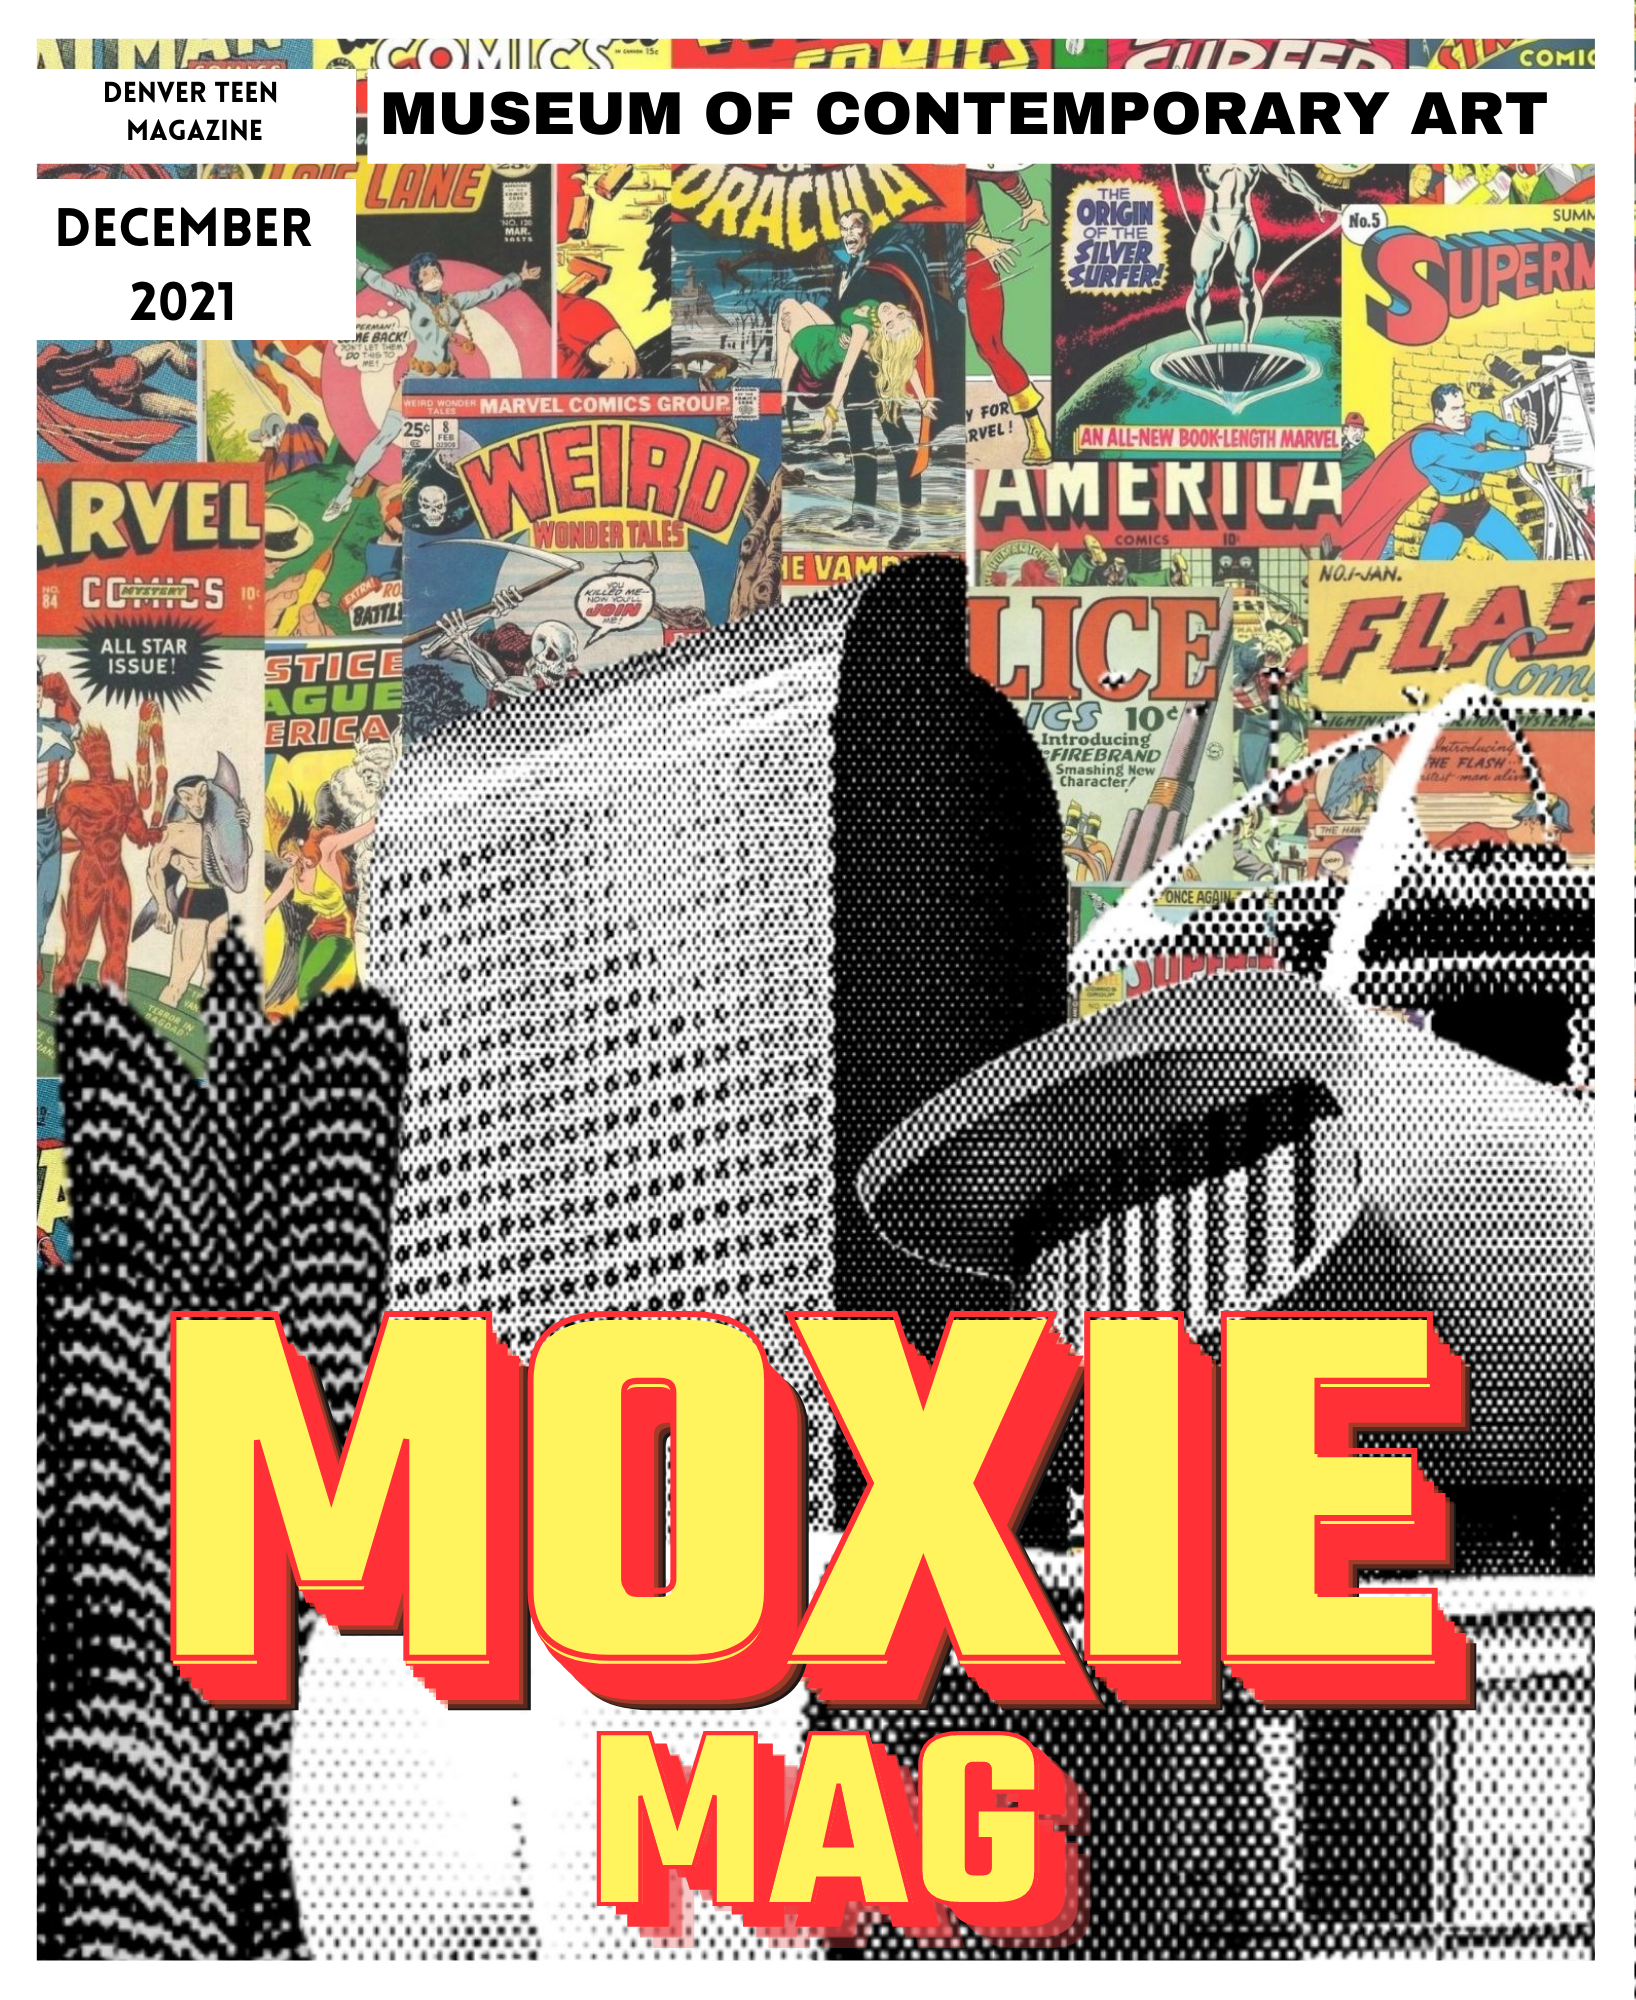 December cover of MCA Denver’s teen publication titled “MoxieMag.” The cover art is a combination of black, white, and gray digitized shapes and collage of comic books. The text “MoxieMag” is printed in bold yellow and red lettering towards the bottom center of the image. 